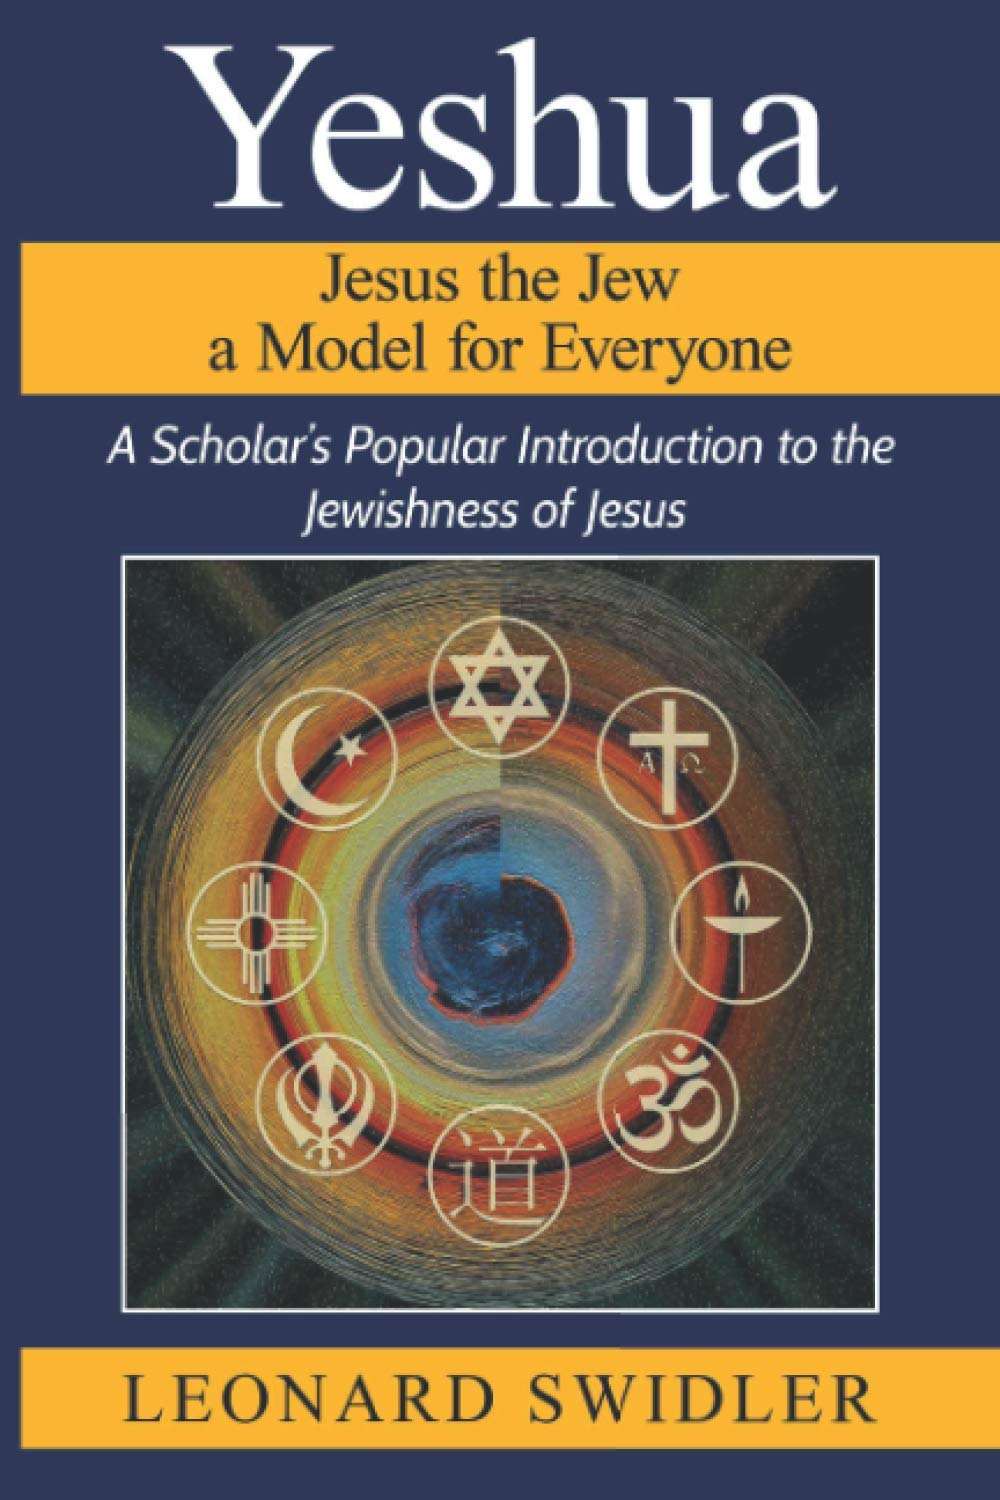 New cover of the book, Yeshua Jesus the Jew A Model for Everyone